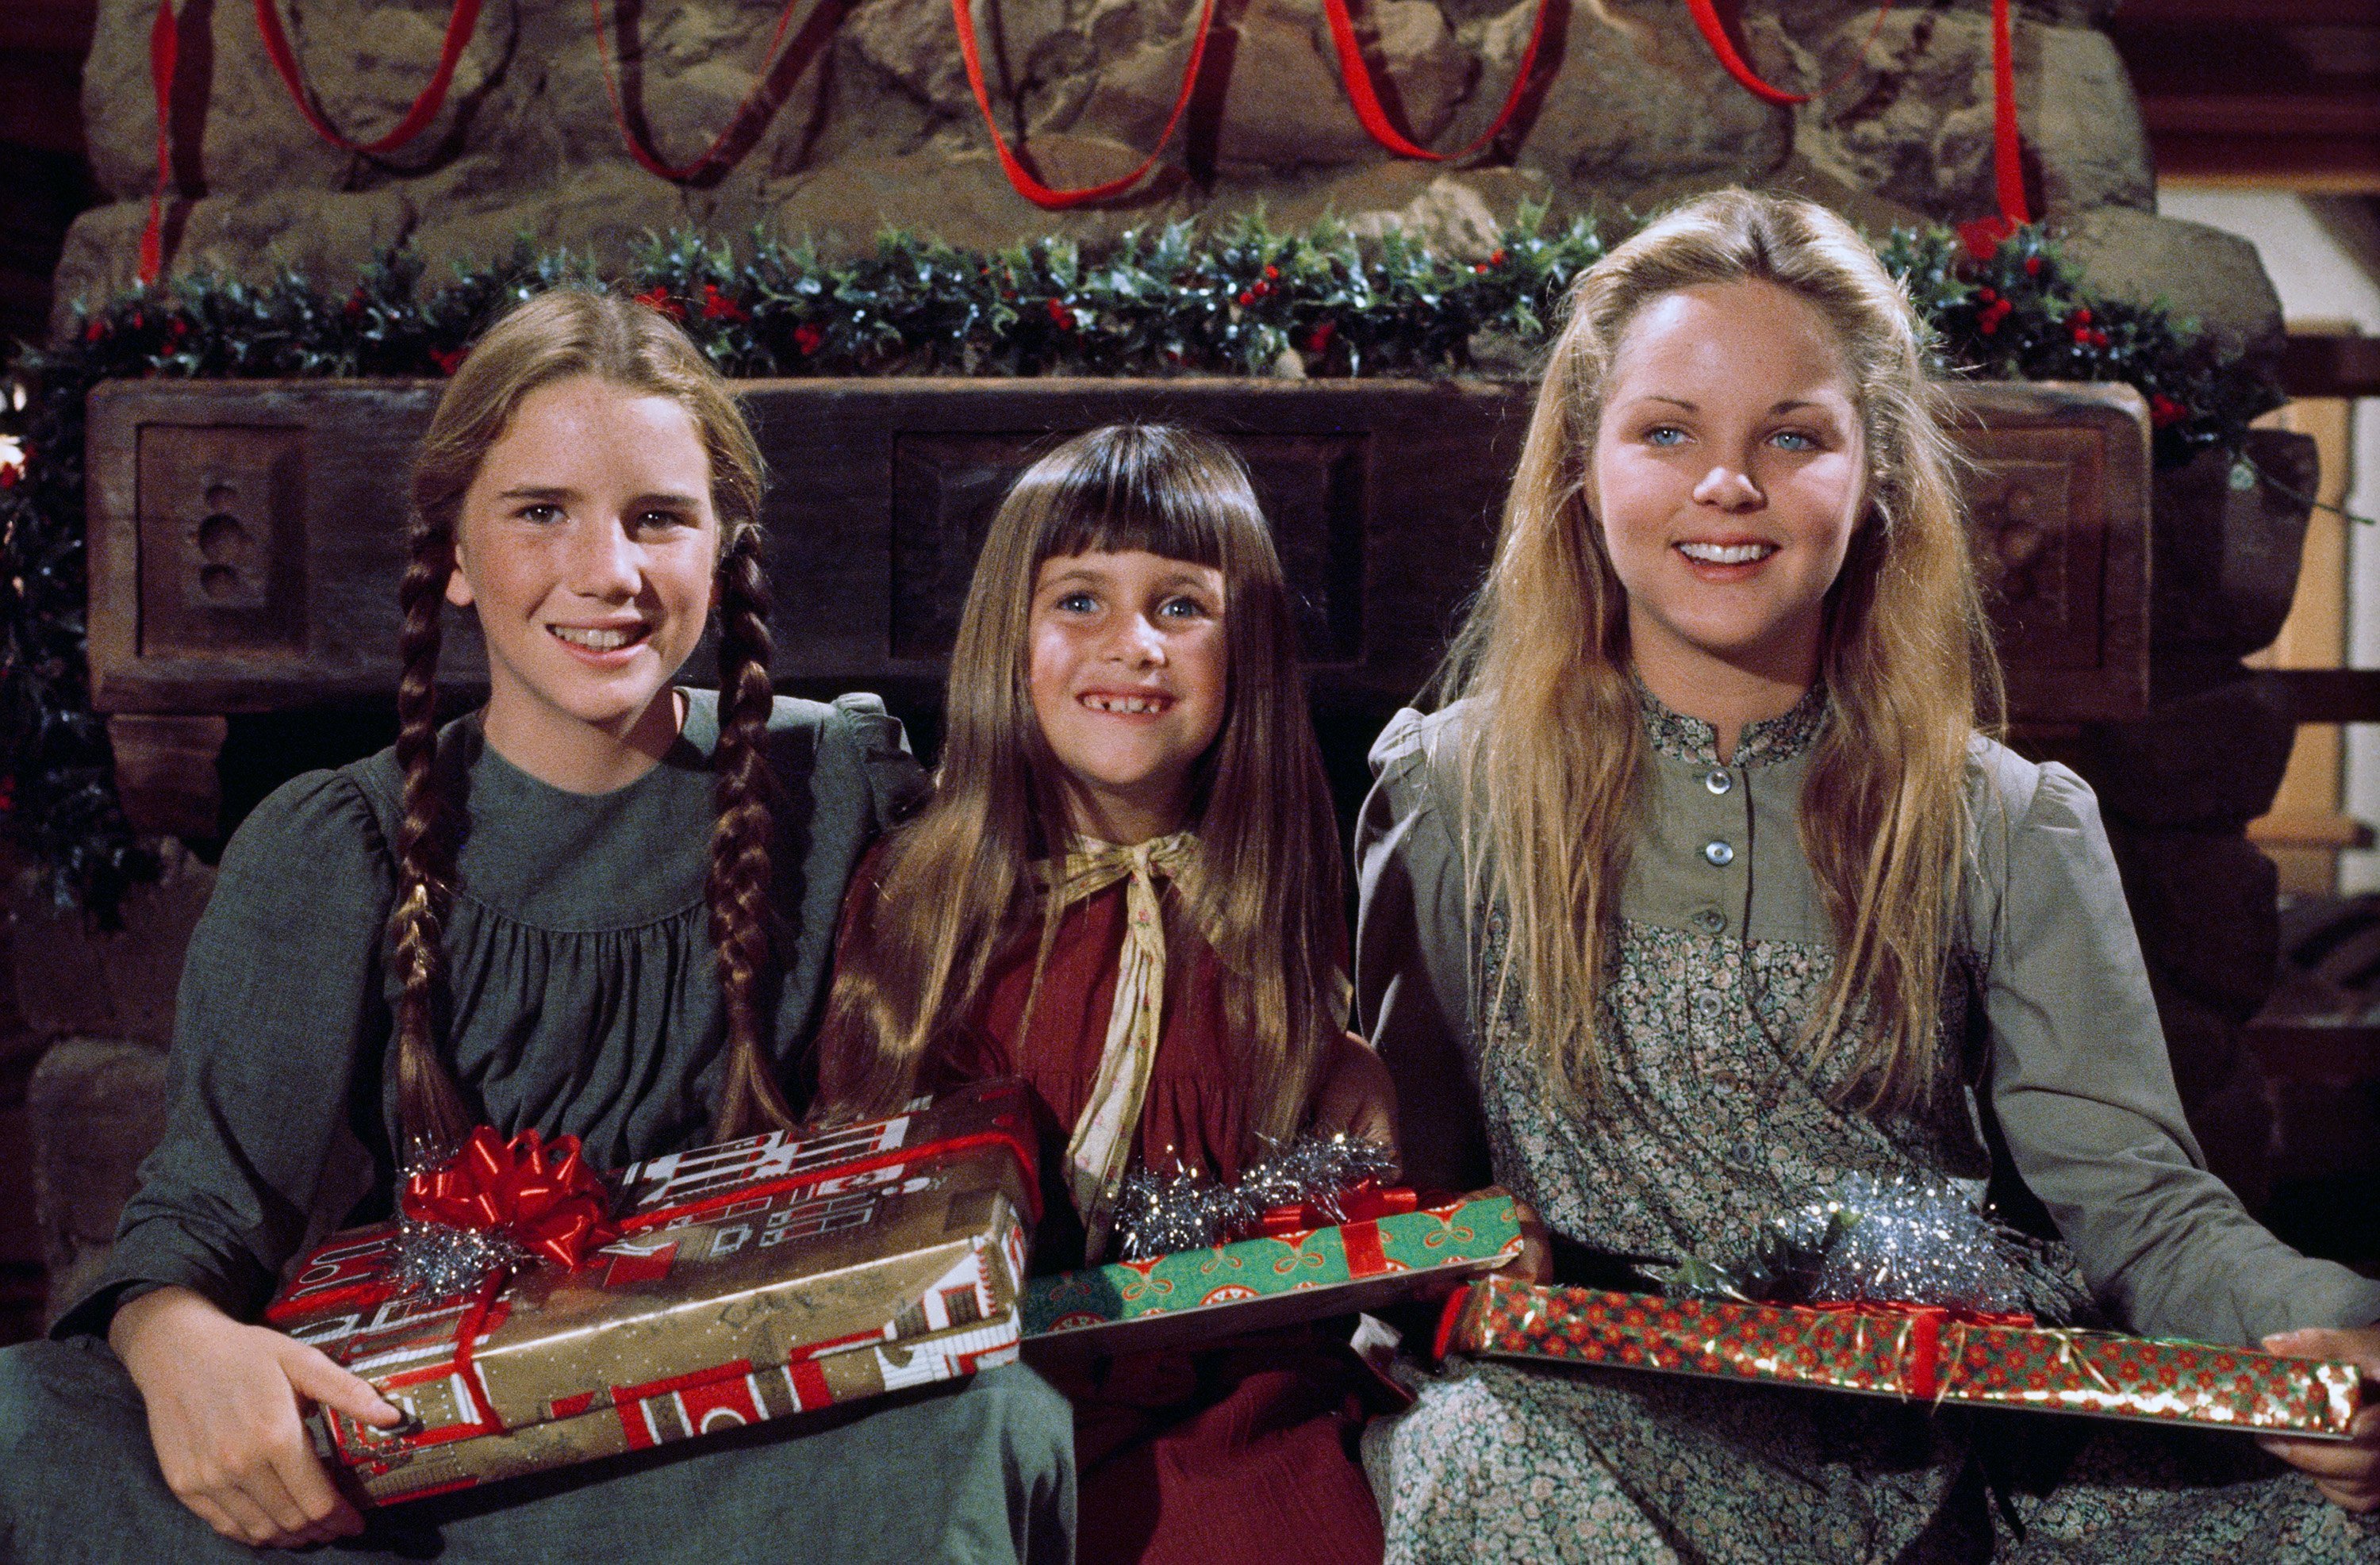 Melissa Gilbert as Laura Elizabeth Ingalls Wilder, Lindsay or Sydney Greenbush as Carrie Ingalls, Melisssa Sue Anderson as Mary Ingalls Kendall